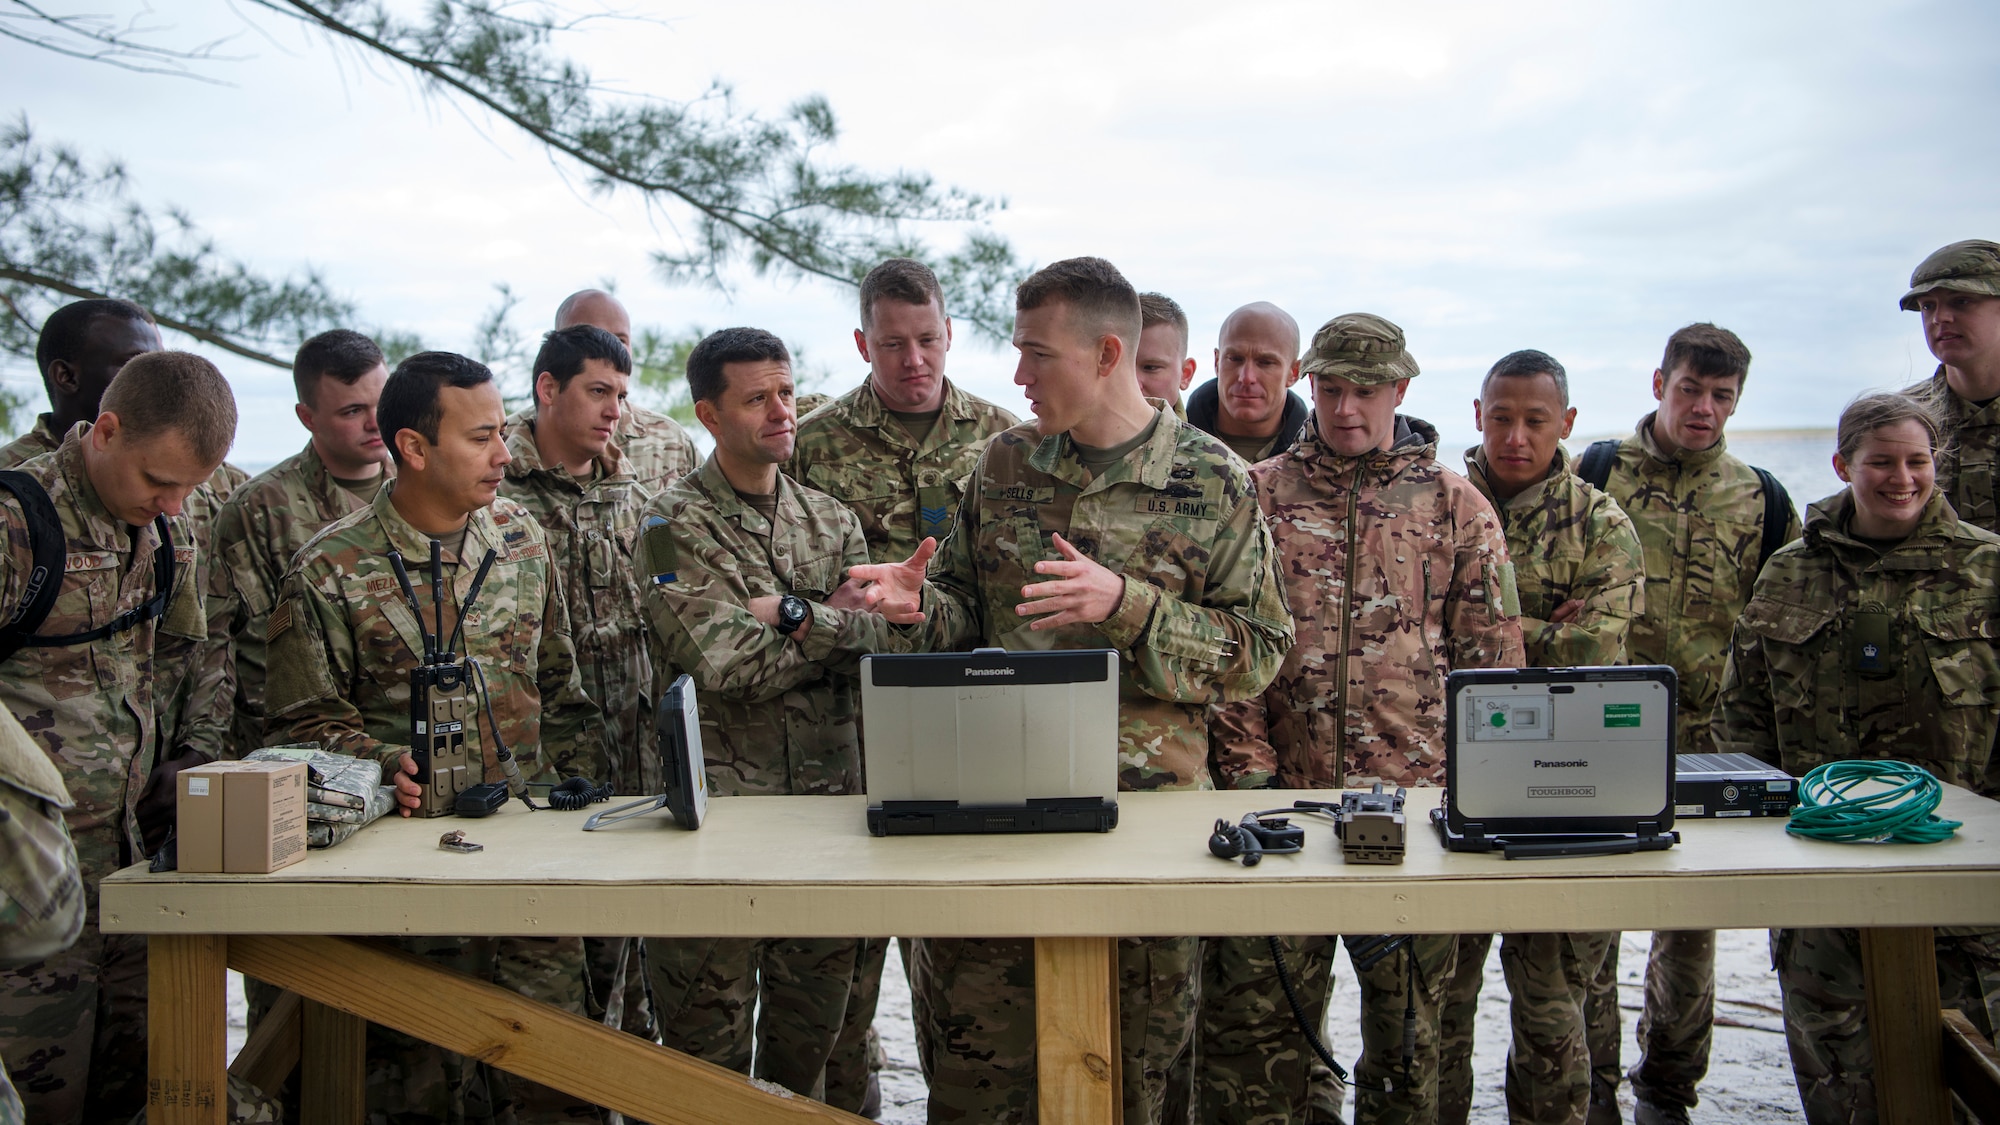 Service members from the Joint Communications Support Element and the British Army’s 30th Signal Regiment gather around U.S. Army Staff Sgt. Kevin Shells (center), a JCSE systems team chief, at Beer Can Island, Fla. Jan. 30, 2019, as he demonstrates how to set up and utilize communications equipment in a deployed environment with no power source. As part of the Cobb Ring exercise, the two nations trained together to demonstrate capabilities with coalition partners and strengthen relationships.